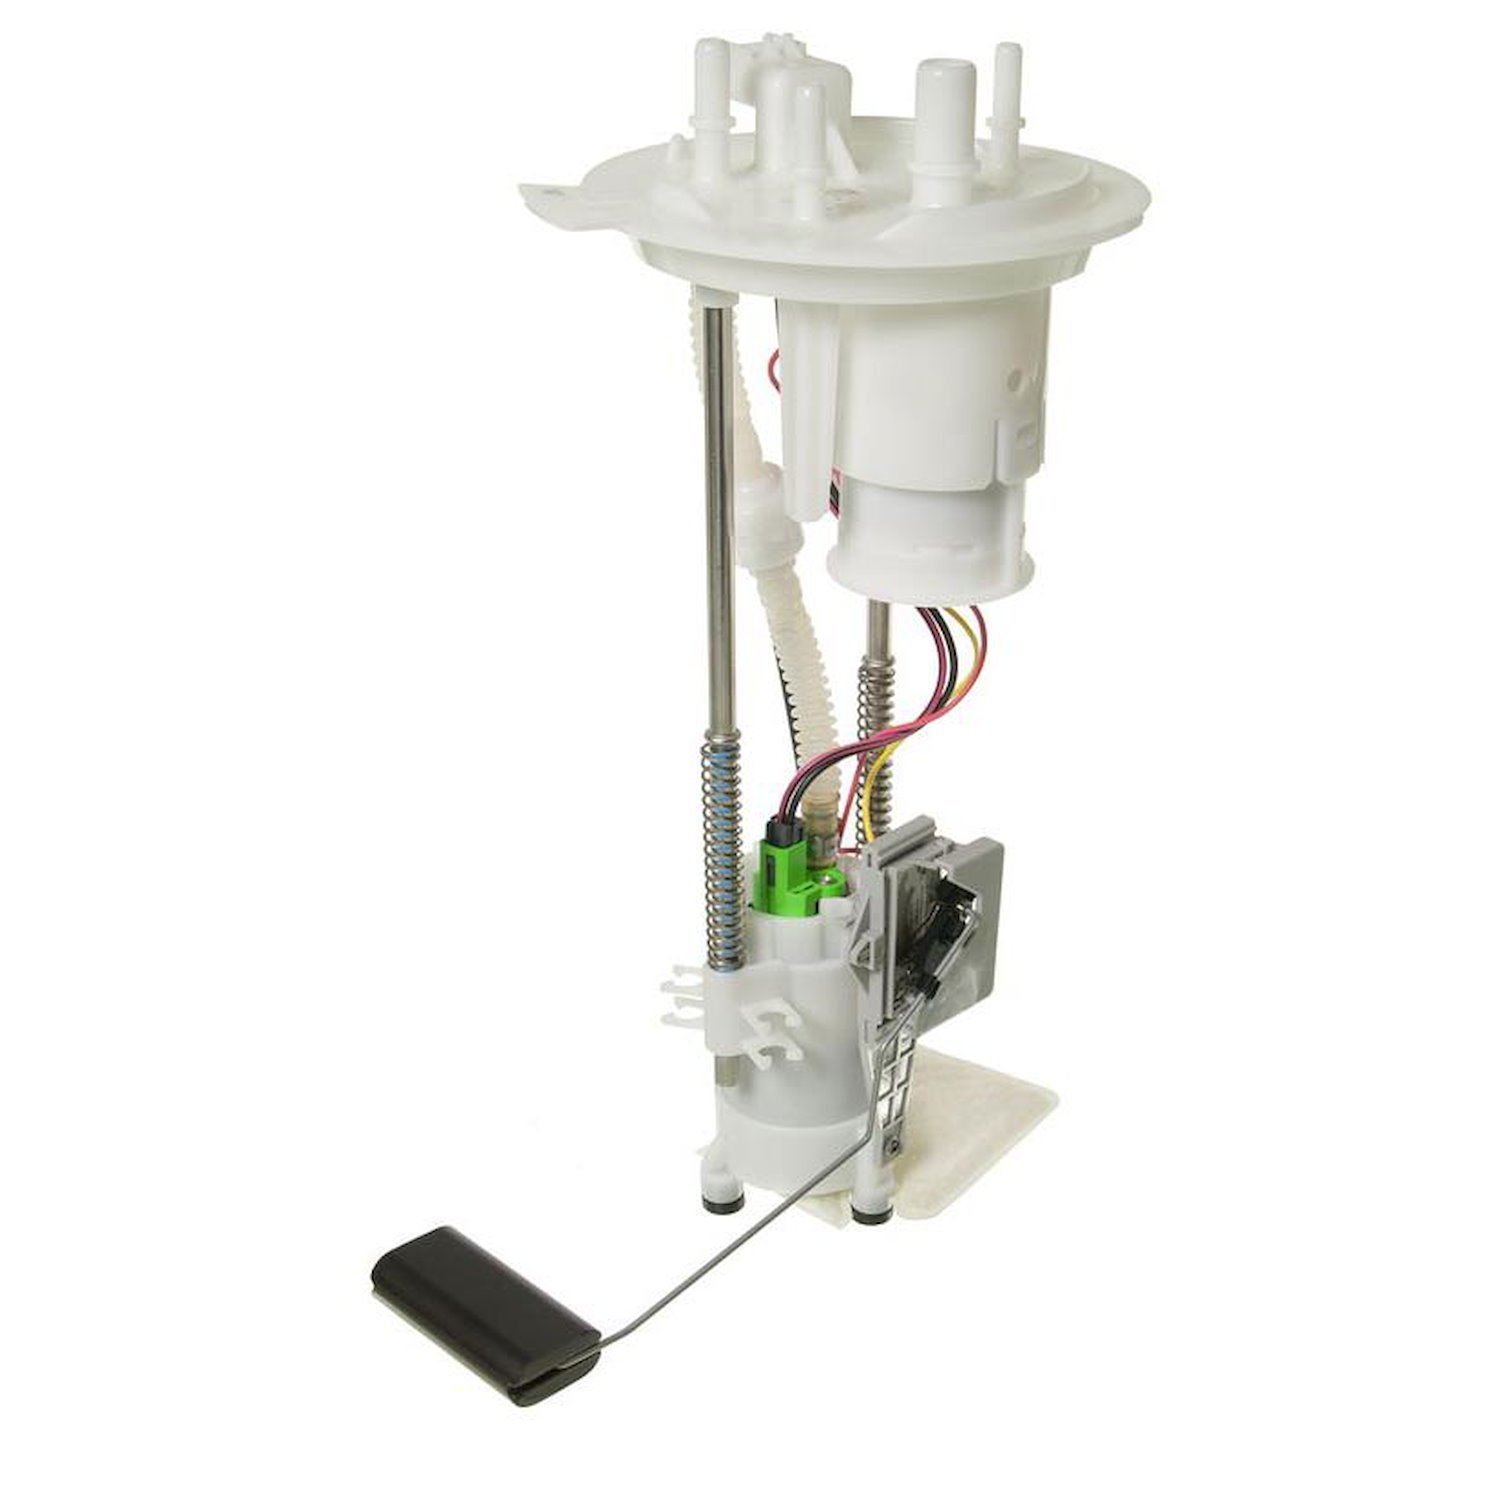 OE Ford Replacement Replacement Fuel Pump Module Assembly for 2005-2008 Ford F-150